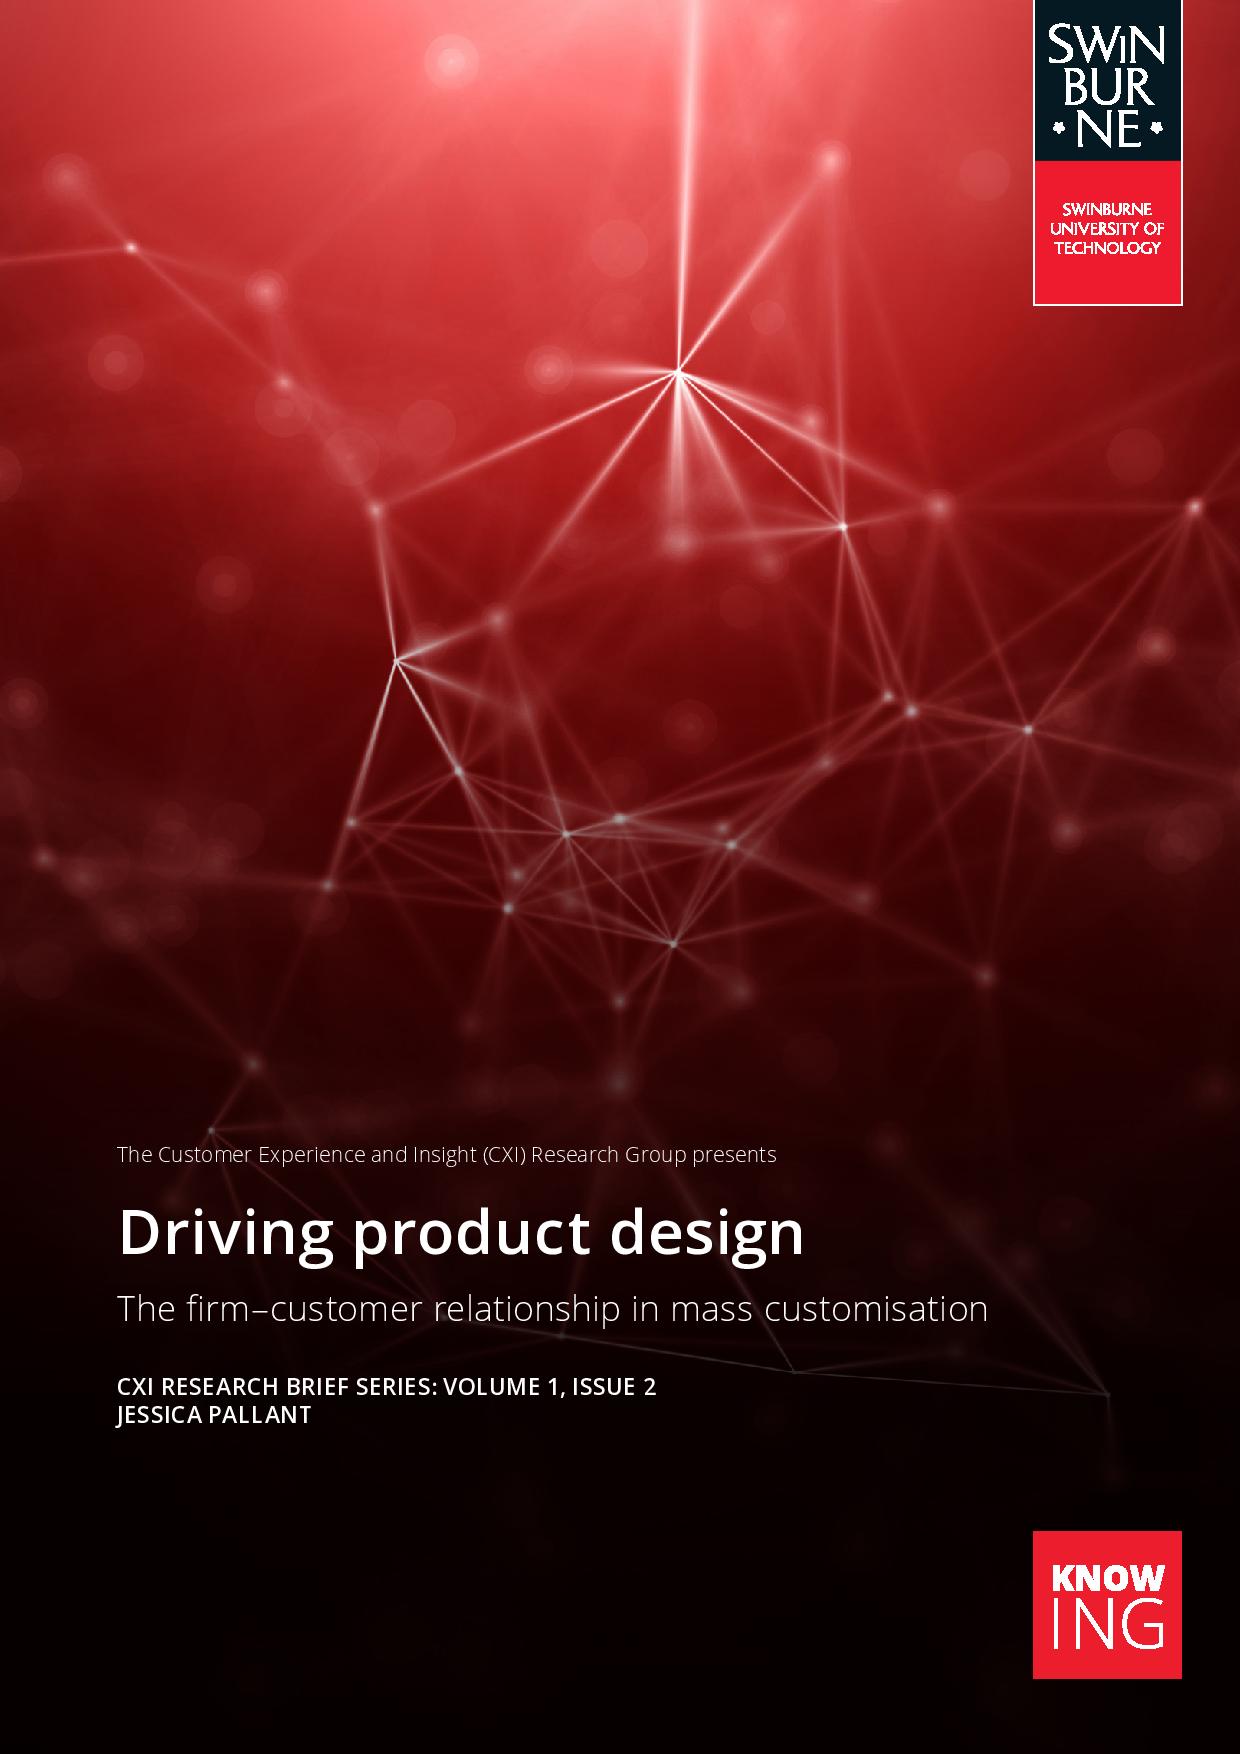 Driving product design: The firm-customer relationship in mass customisation